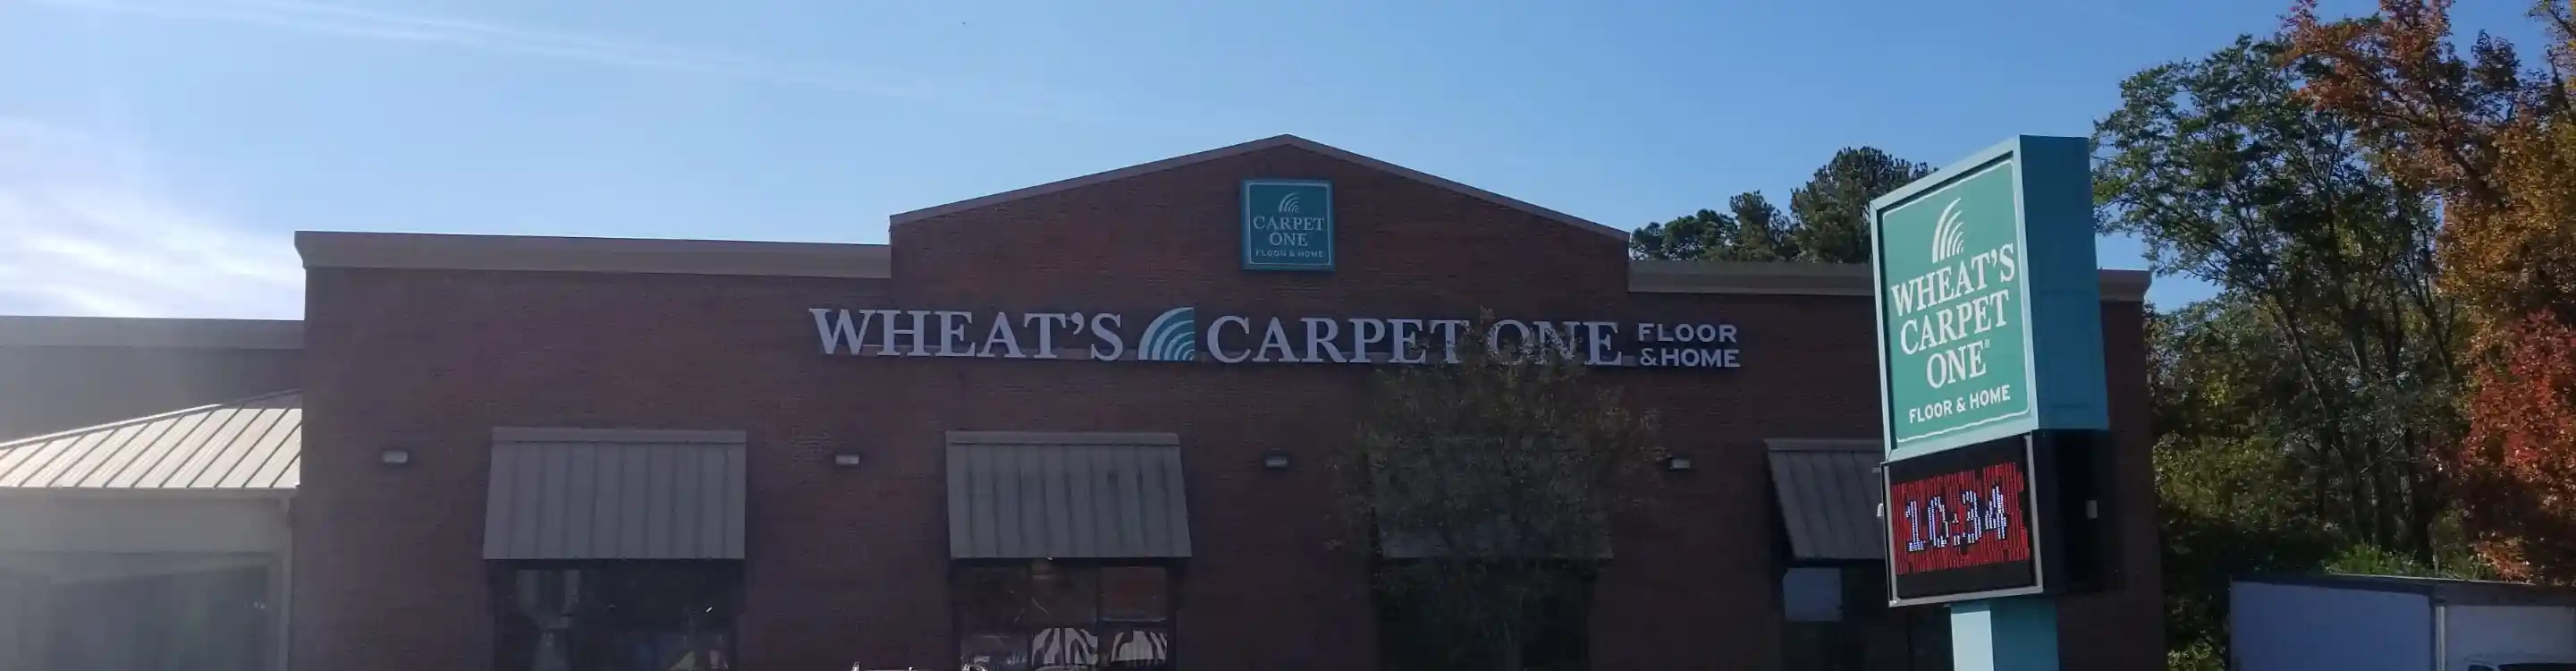 wheats carpet one storefront